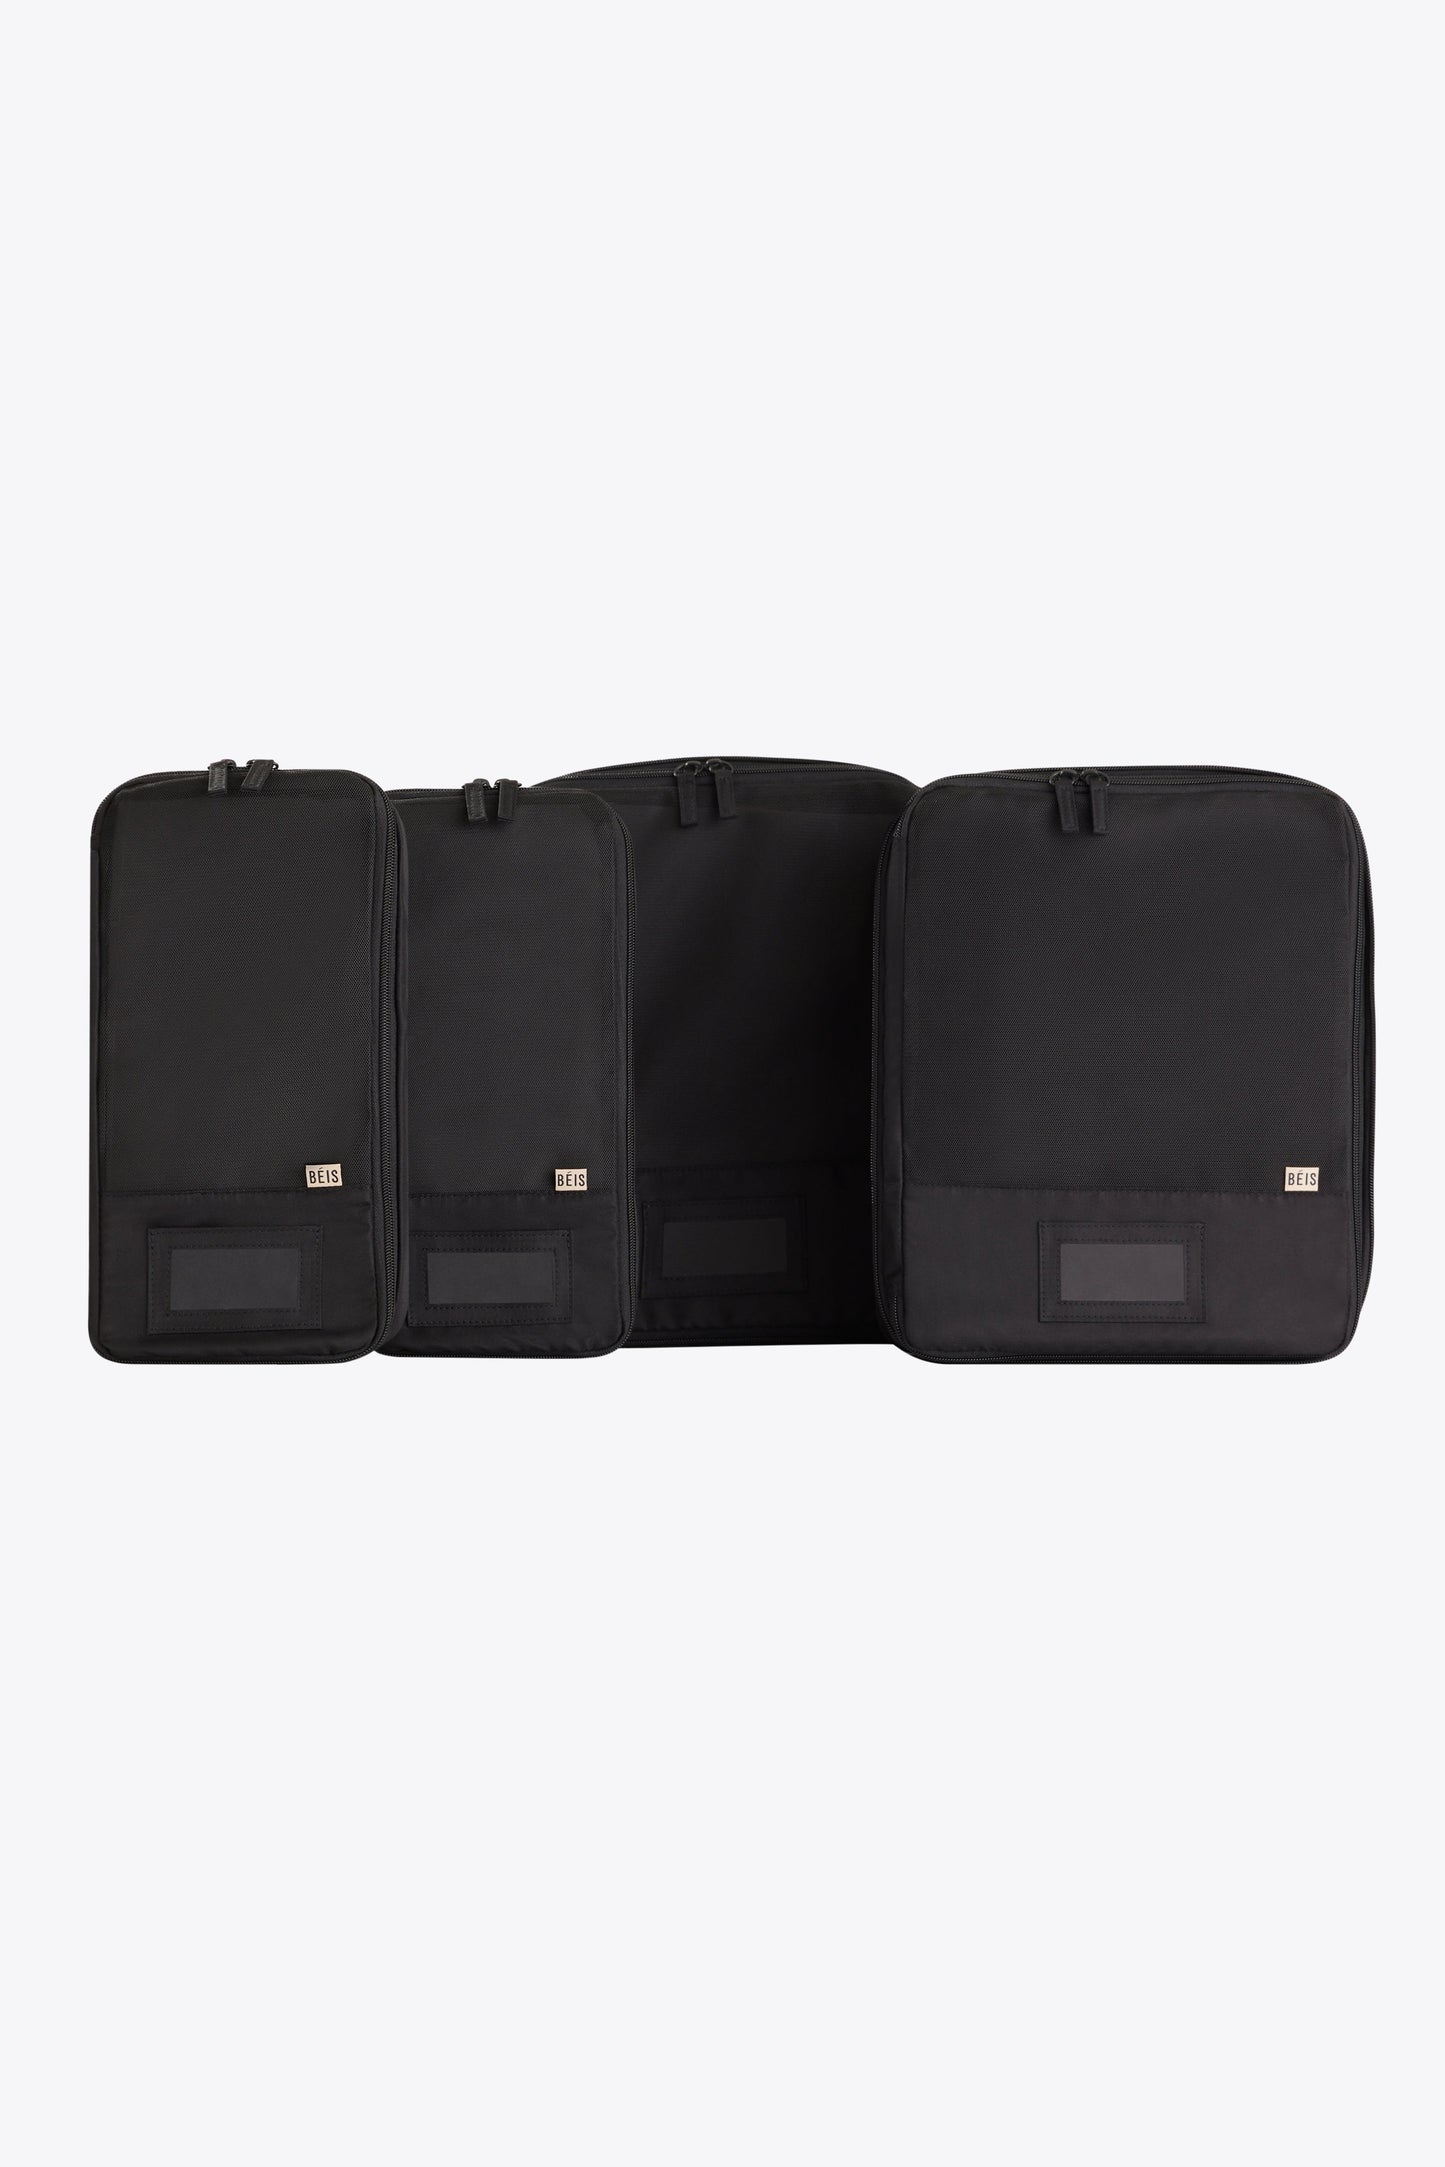 The Compression Packing Cubes 4 pc in Black